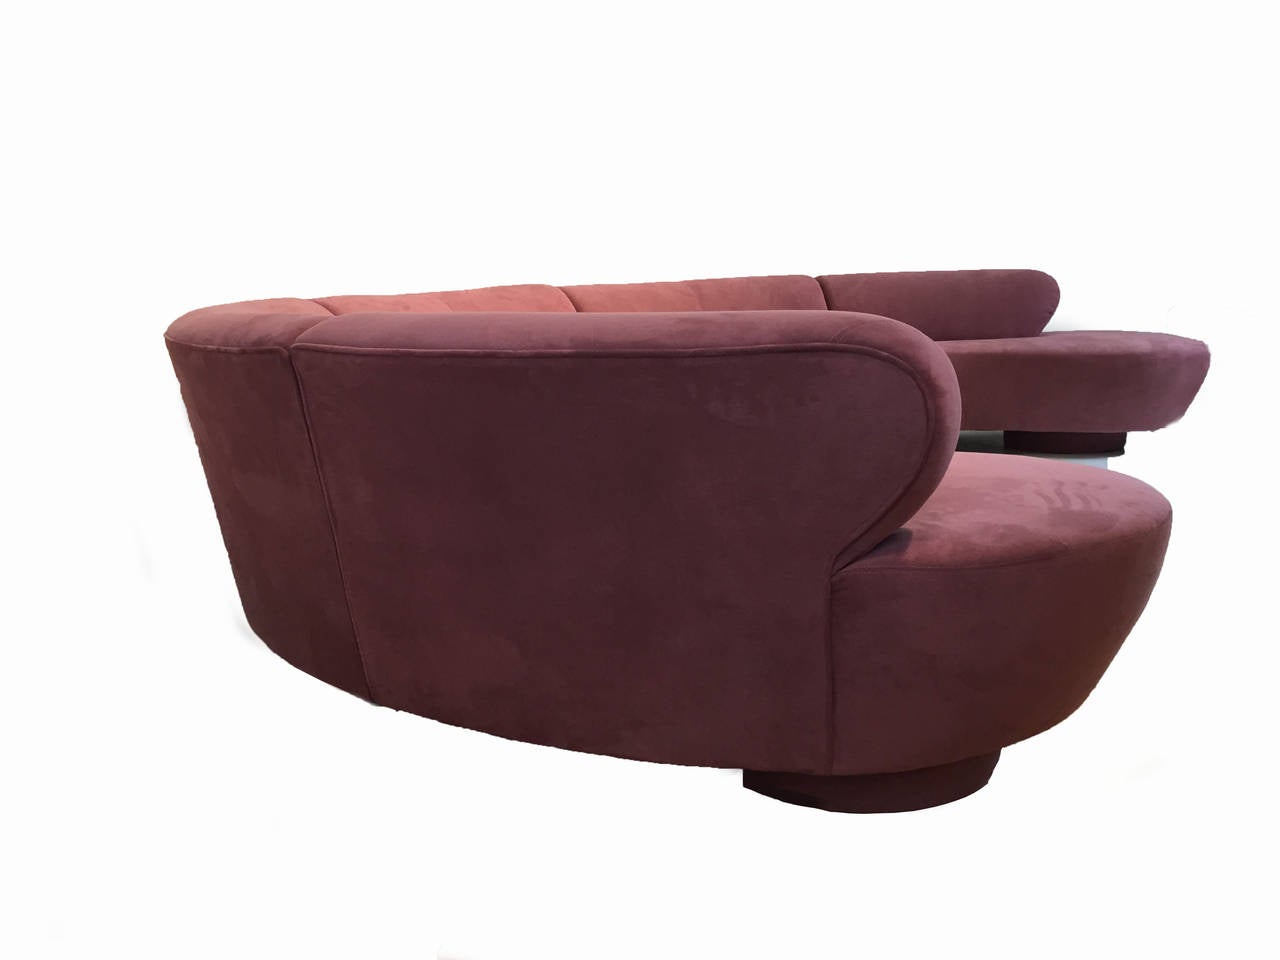 Exceptional five-piece serpentine cloud sofa. Fabric is mauve ultra suede and in excellent condition. Marvelous.